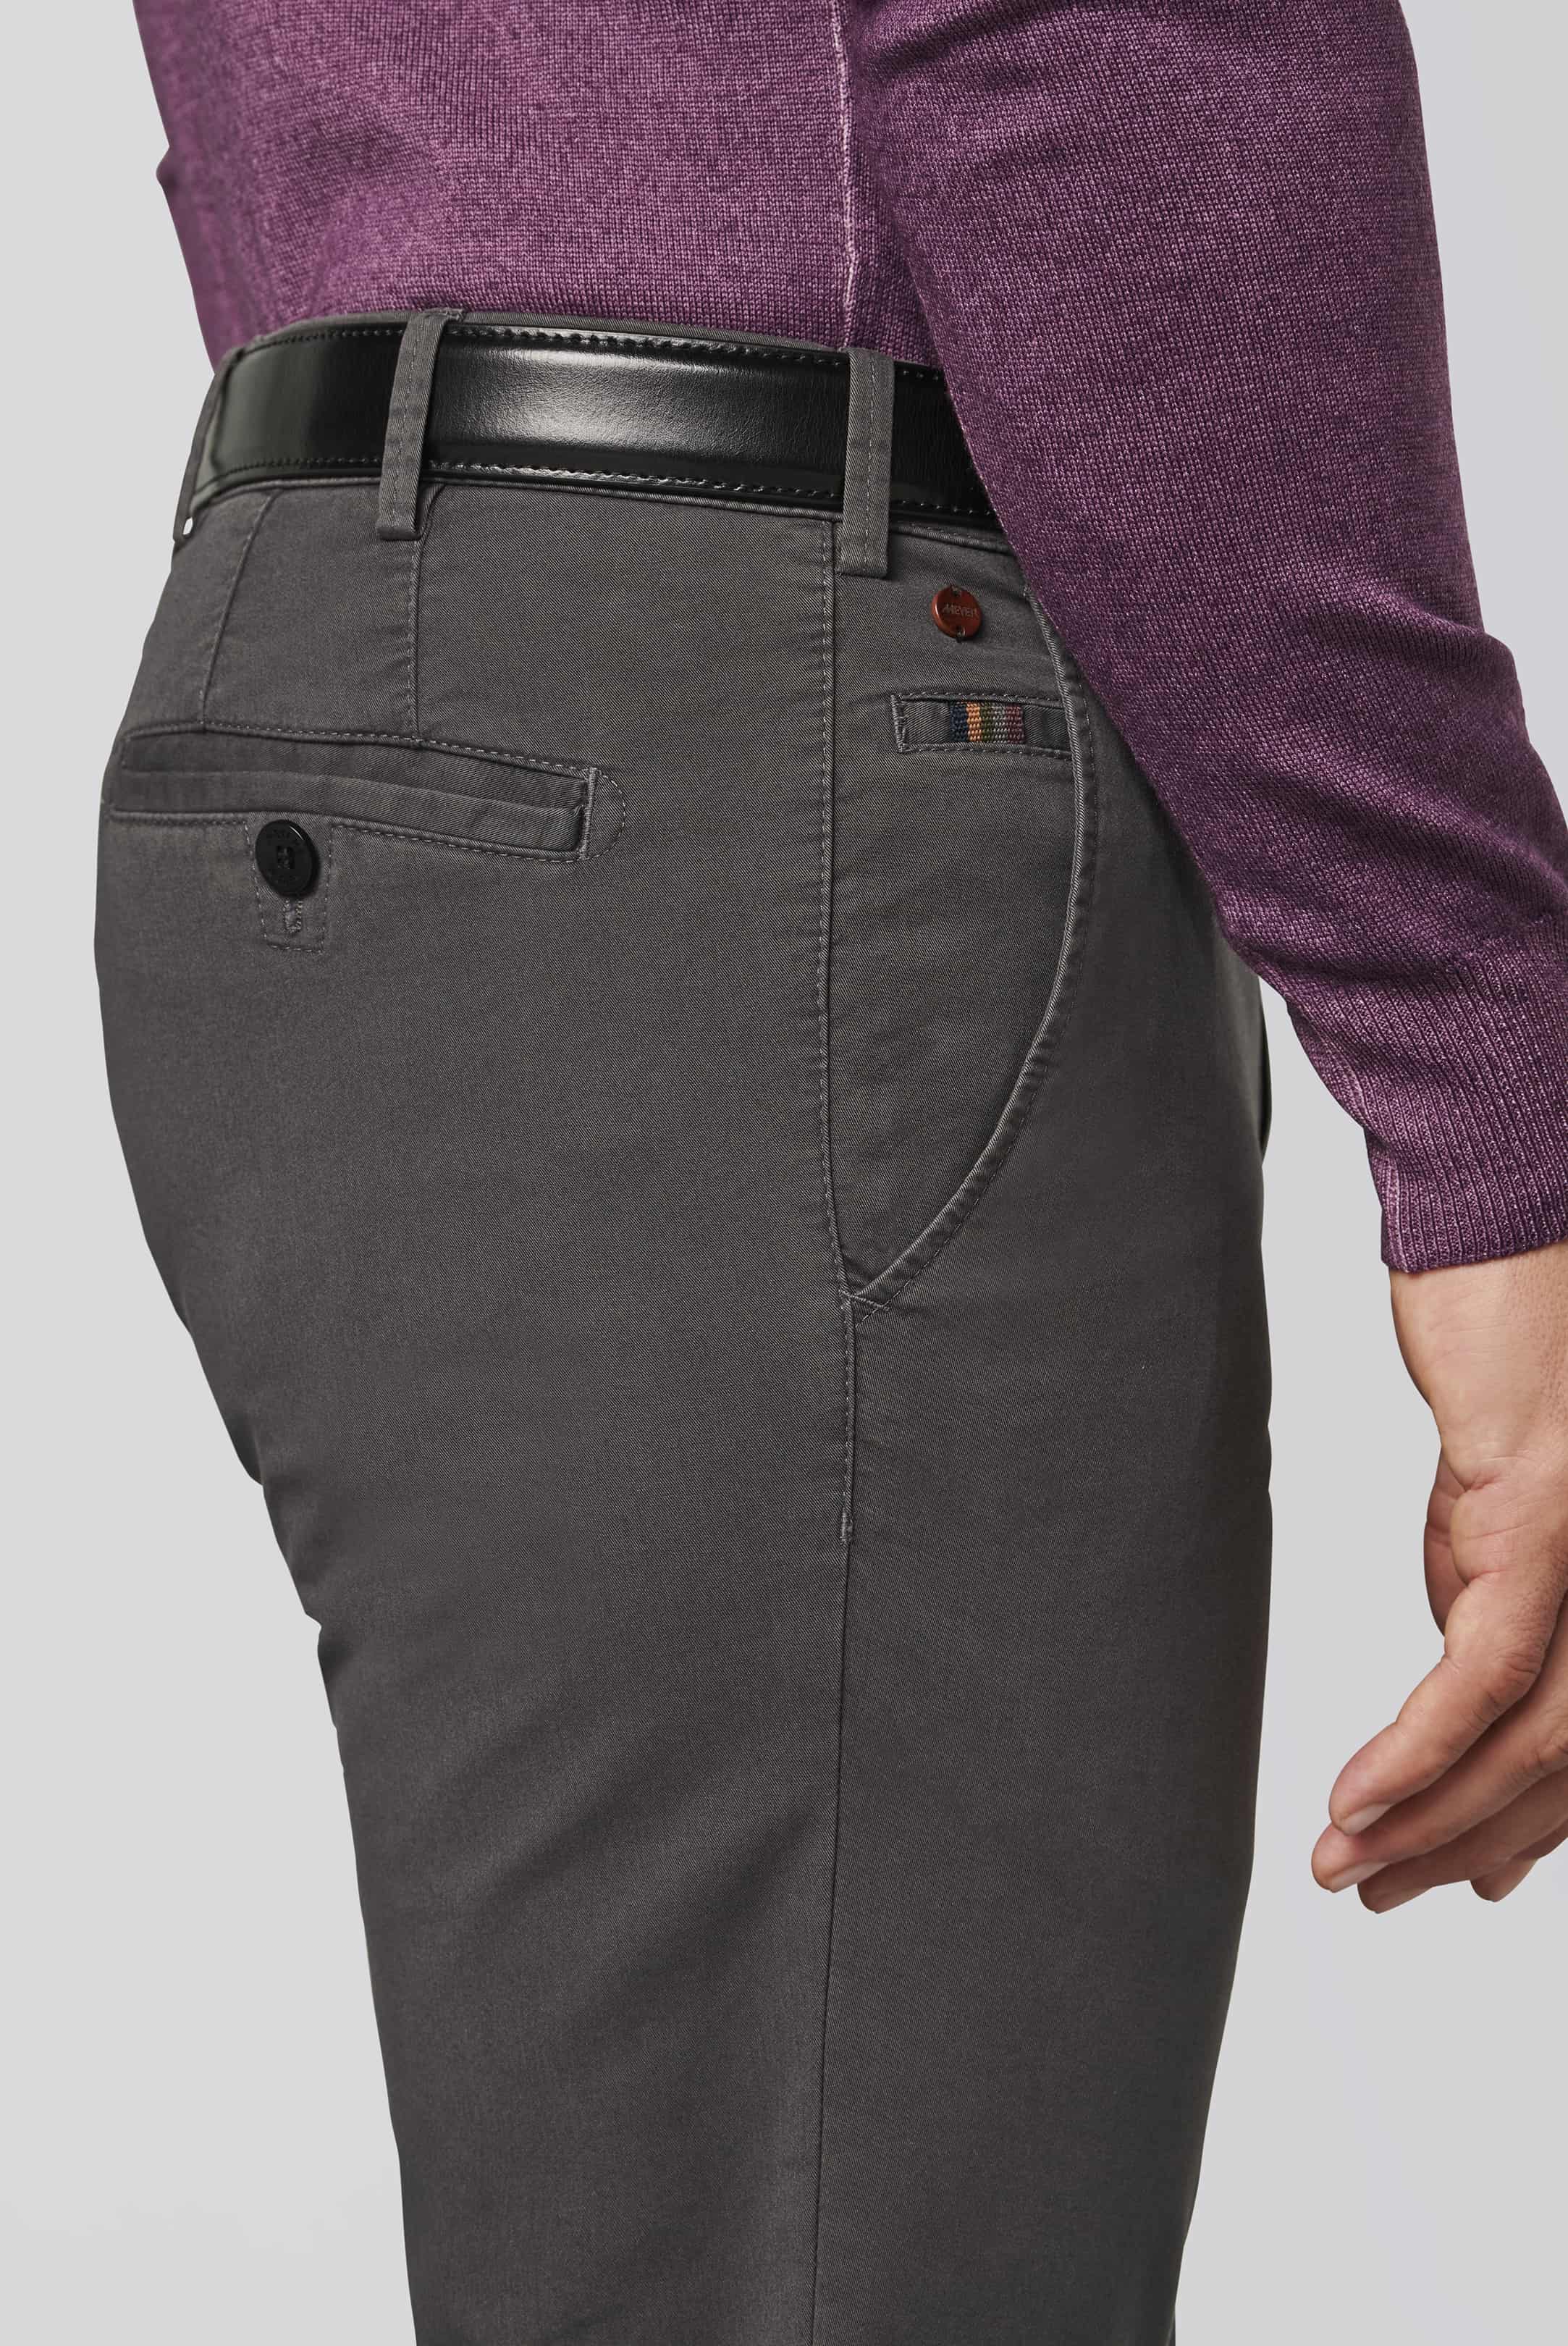 30% OFF MEYER Trousers - Roma 316 Luxury Cotton Chinos - Charcoal - Size 30 REG